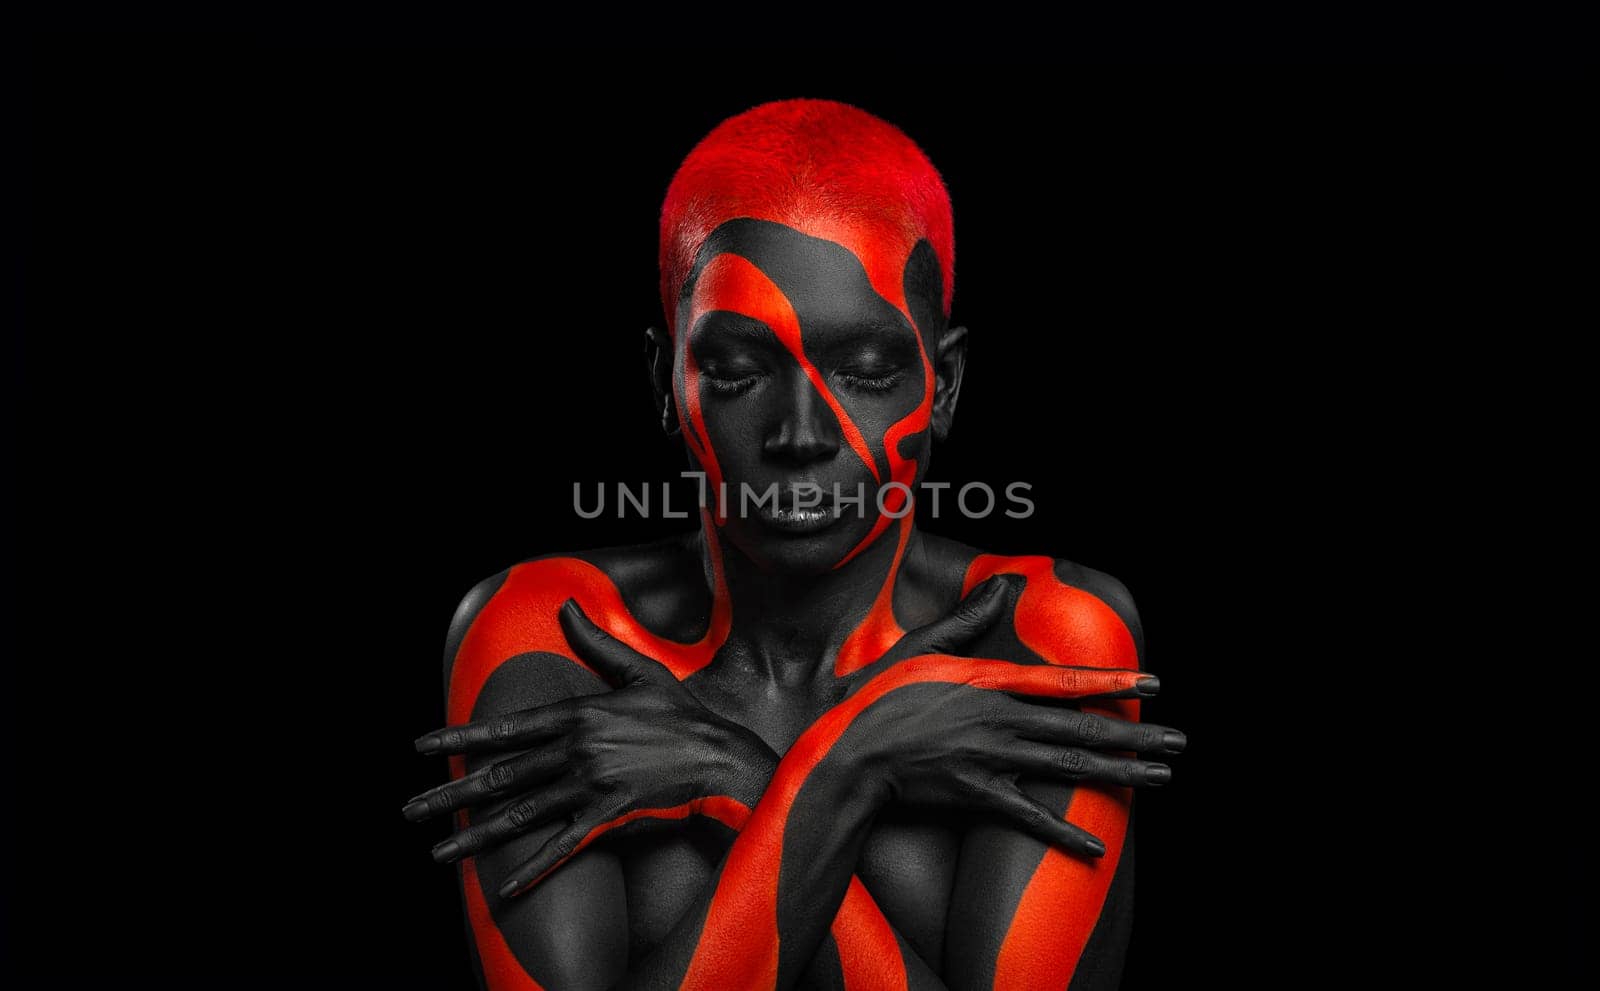 The Art Face. Black and yellow body paint on african woman. Abstract creative portrait. Copy space for your text.